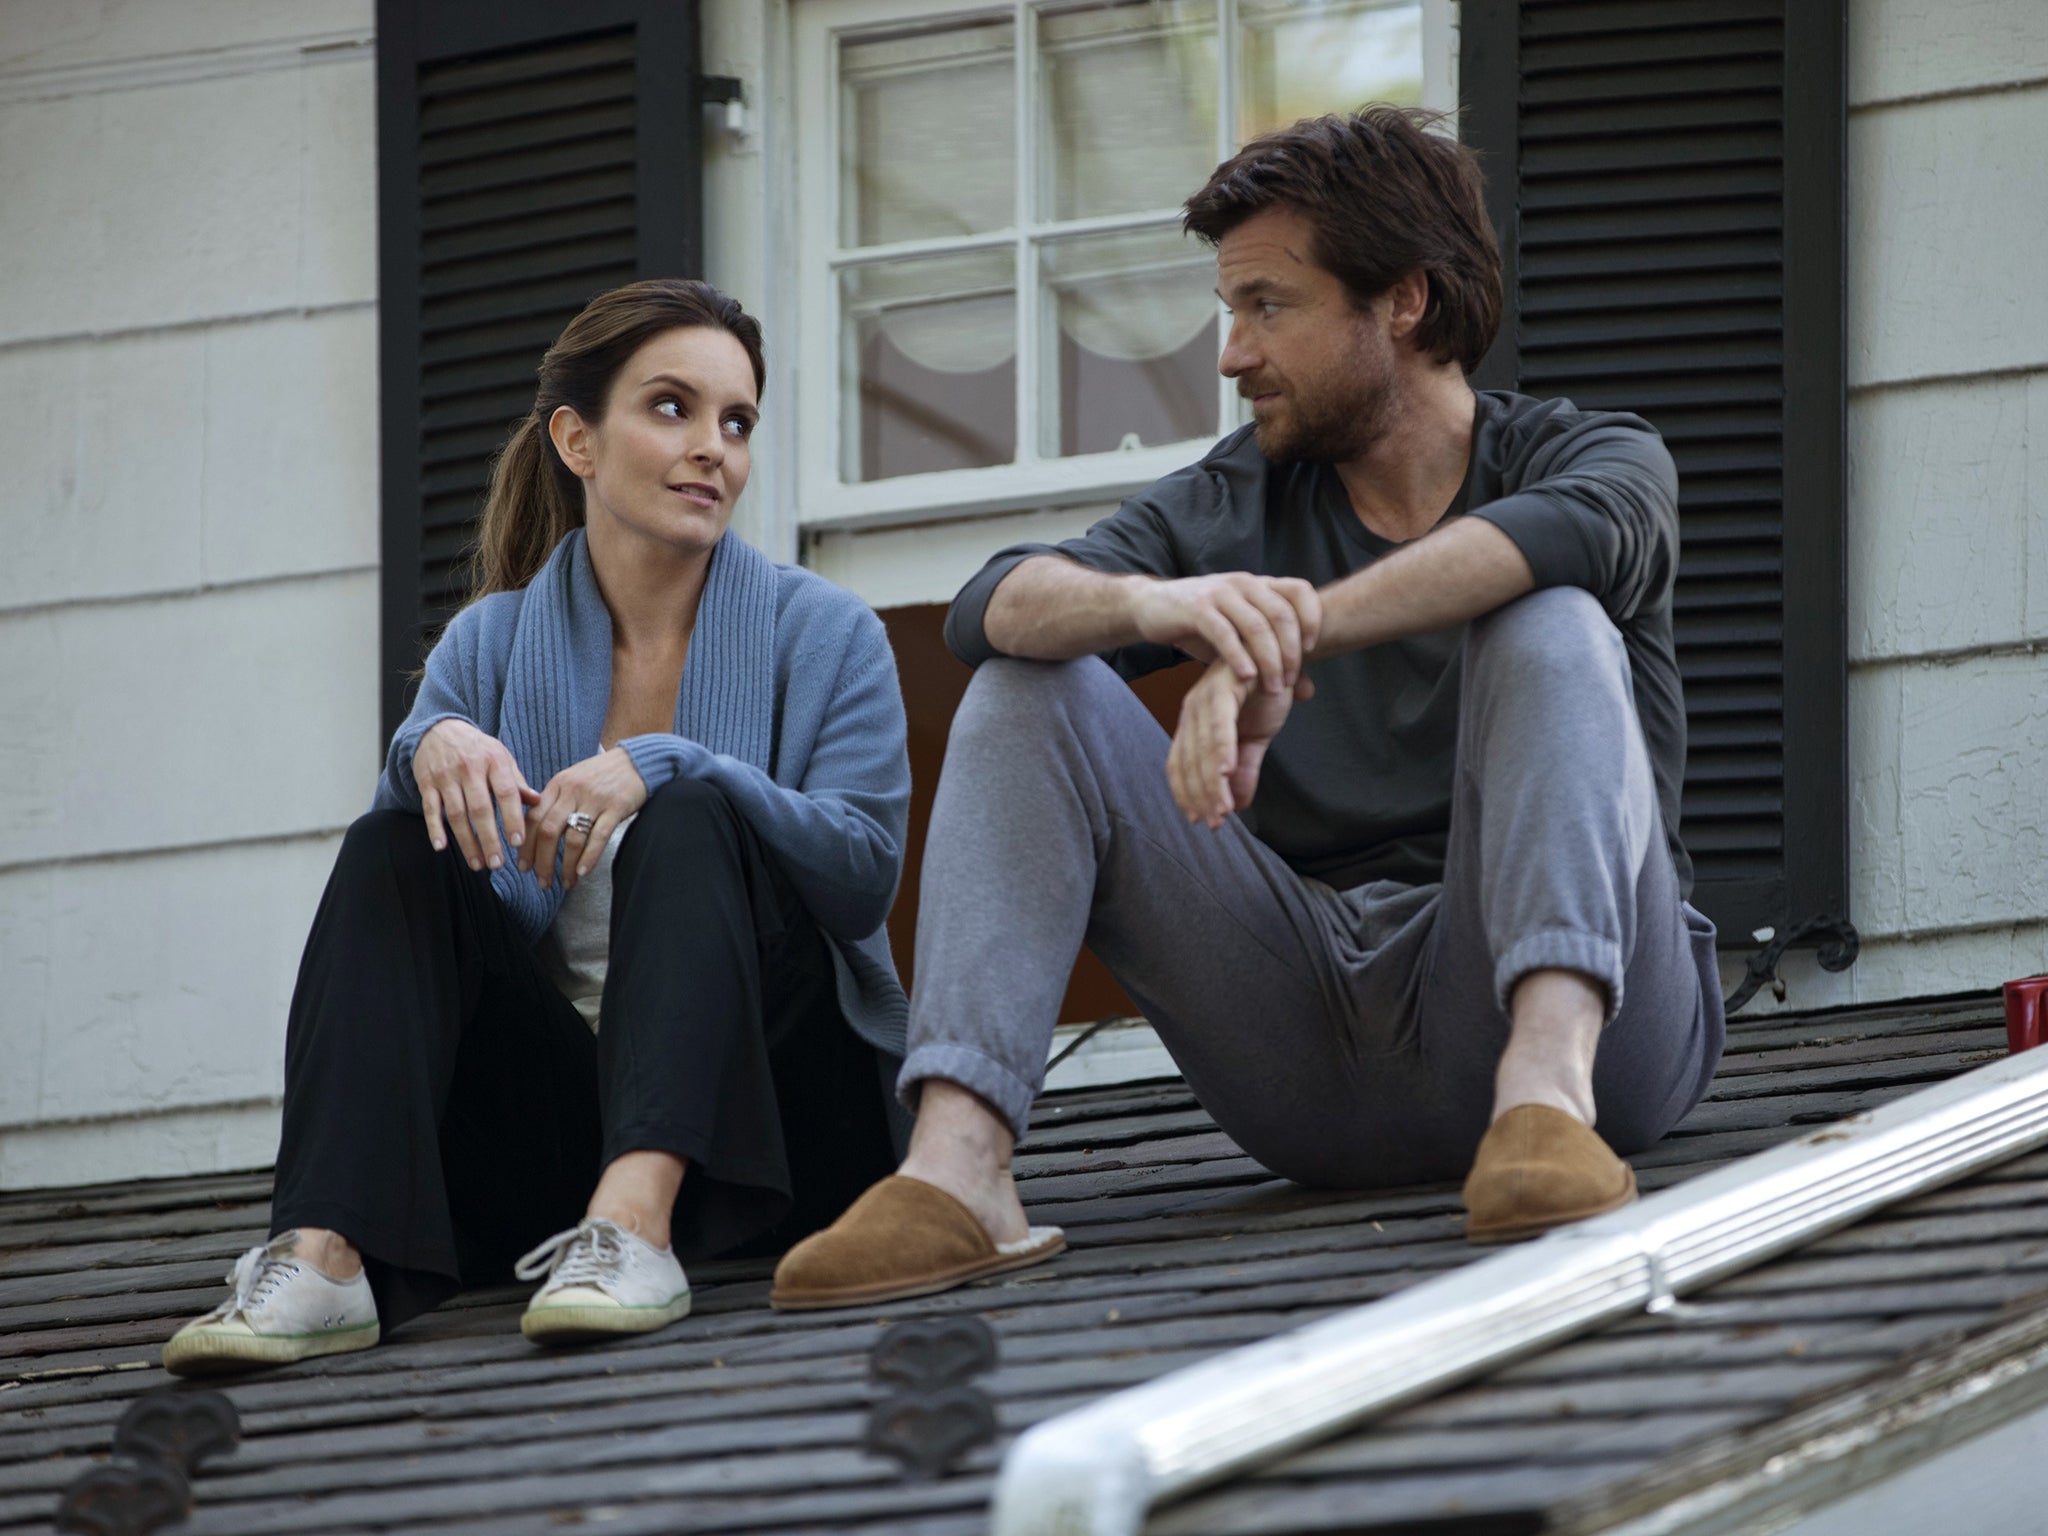 Tia Fey and Jason Bateman in 'This Is Where I Leave You'